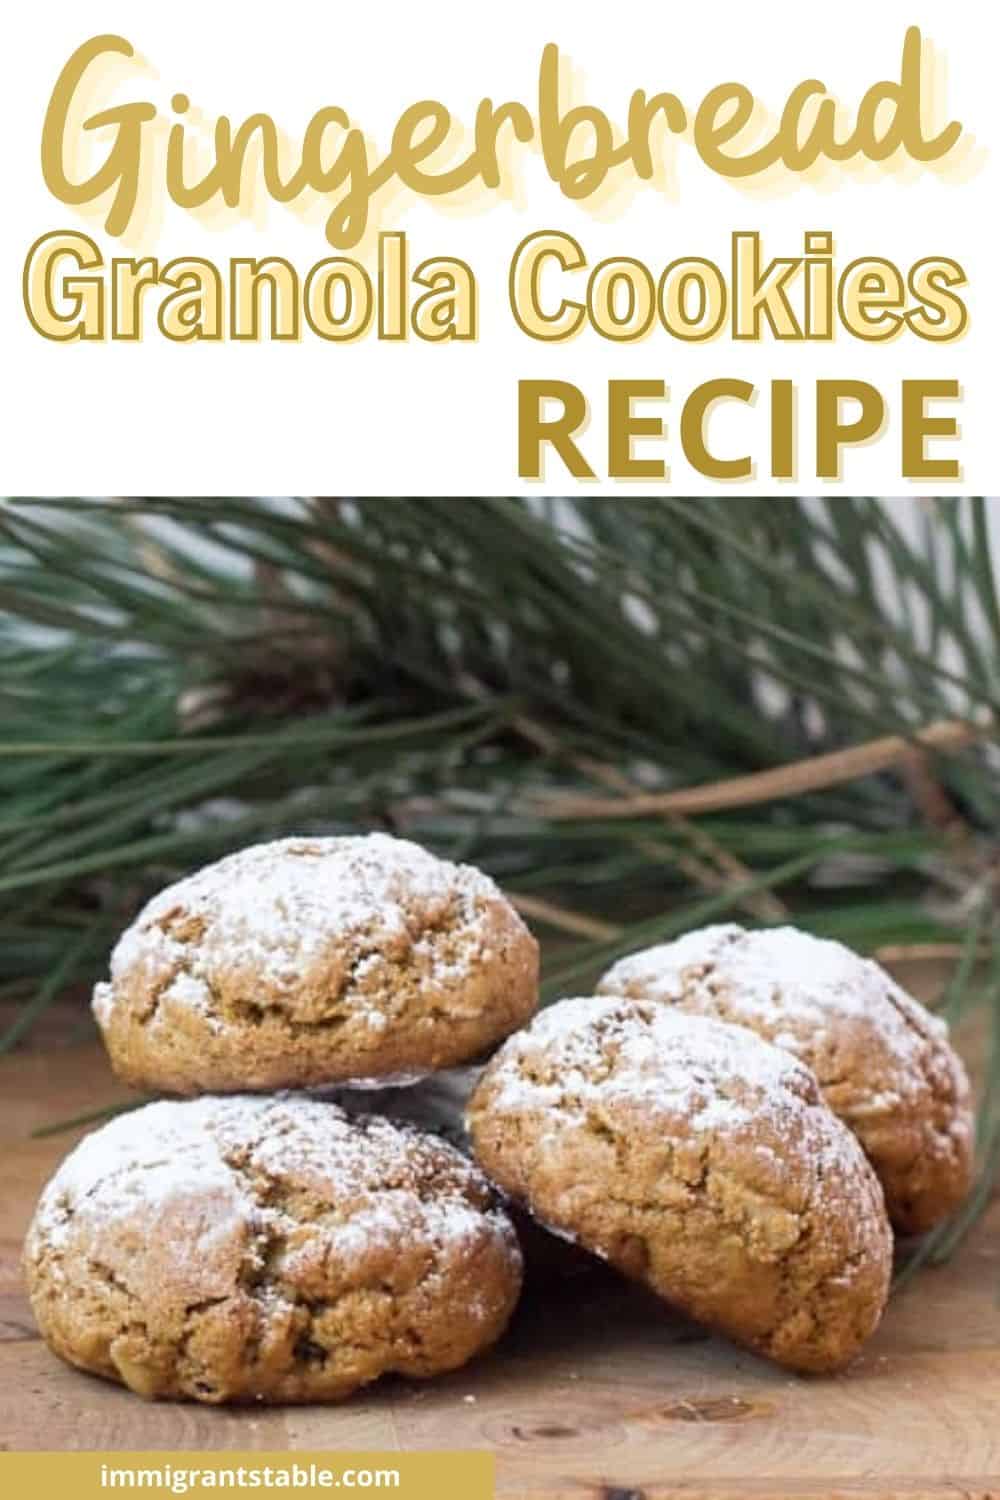 Gingerbread granola cookies in a pile